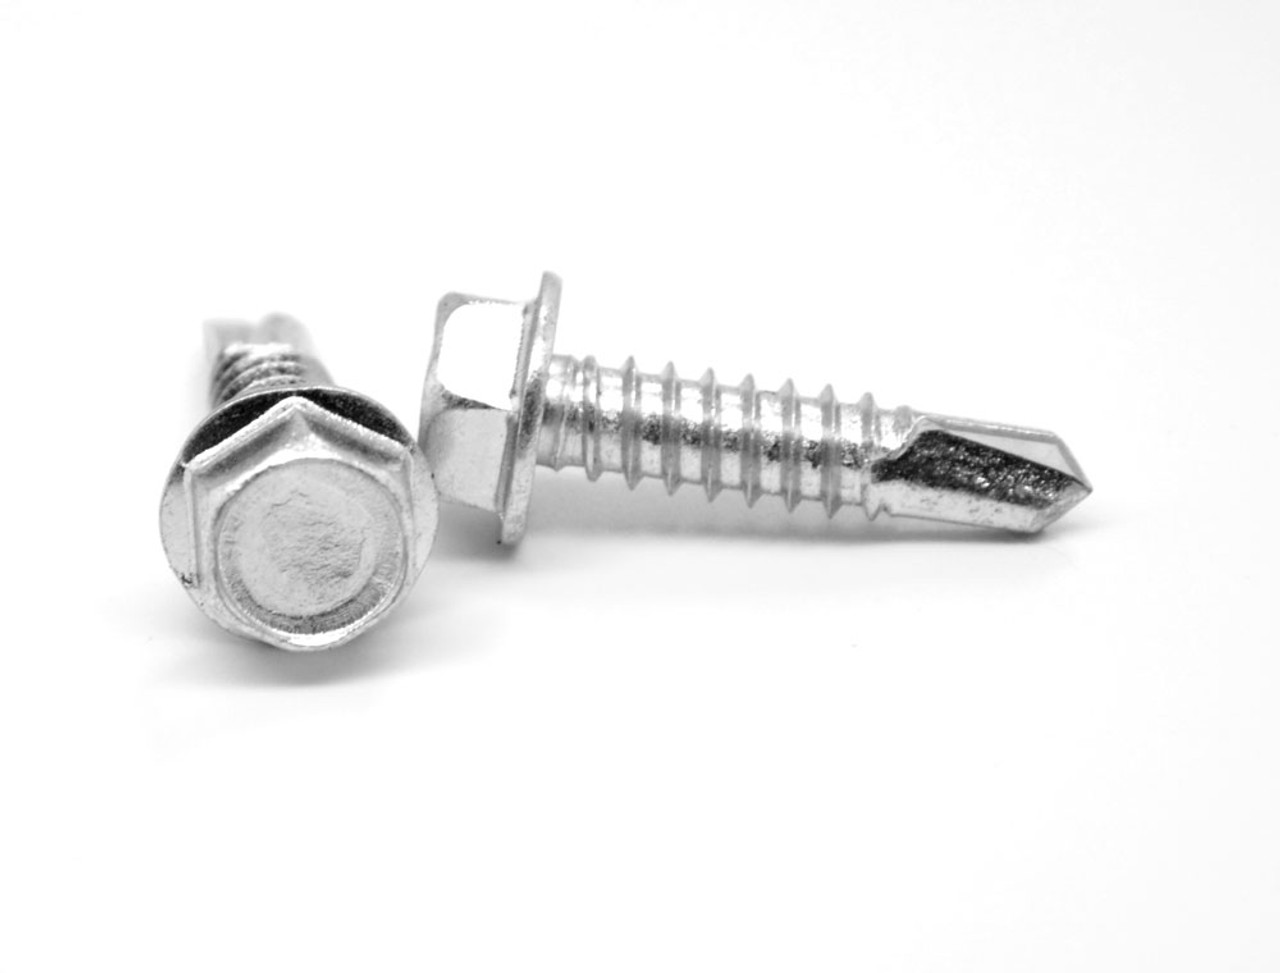 #10-32 x 1/2" (FT) Fine Thread Self Drilling Screw Hex Washer Head #2 Point Low Carbon Steel Zinc Plated